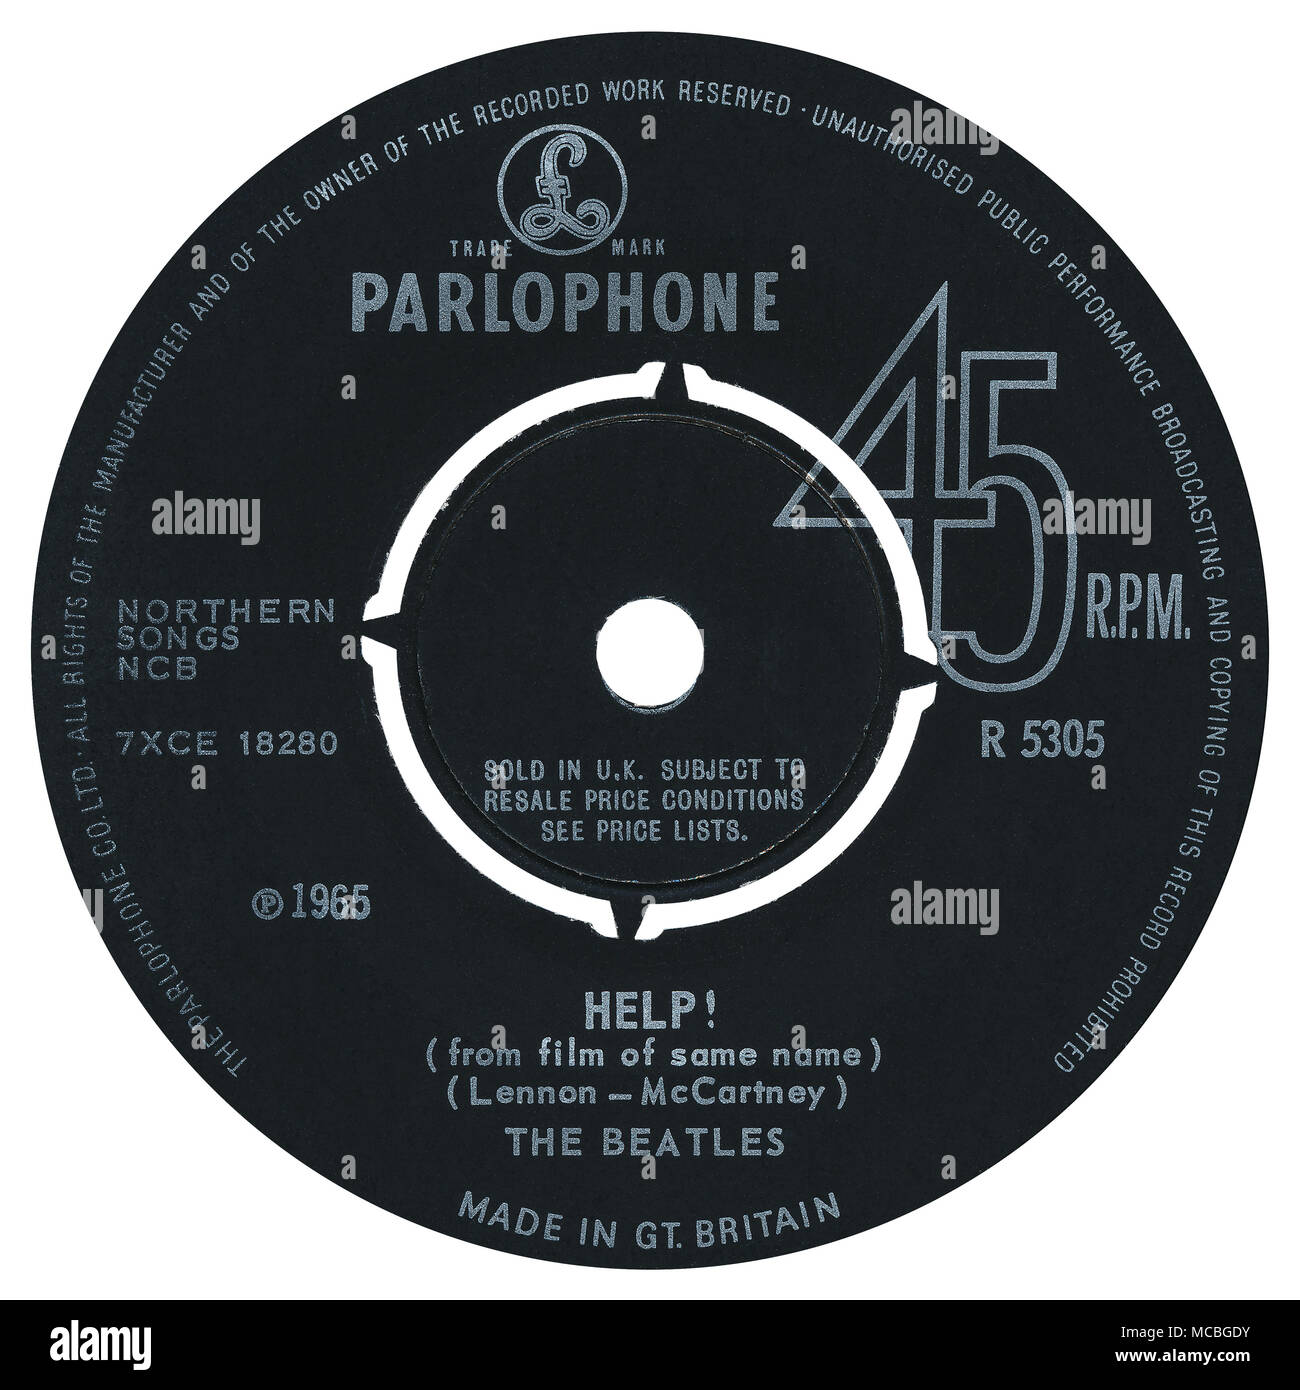 45 RPM 7' UK record label of Help! by The Beatles on Parlophone Records from 1965. Written by John Lennon and Paul McCartney and produced by George Martin. Stock Photo